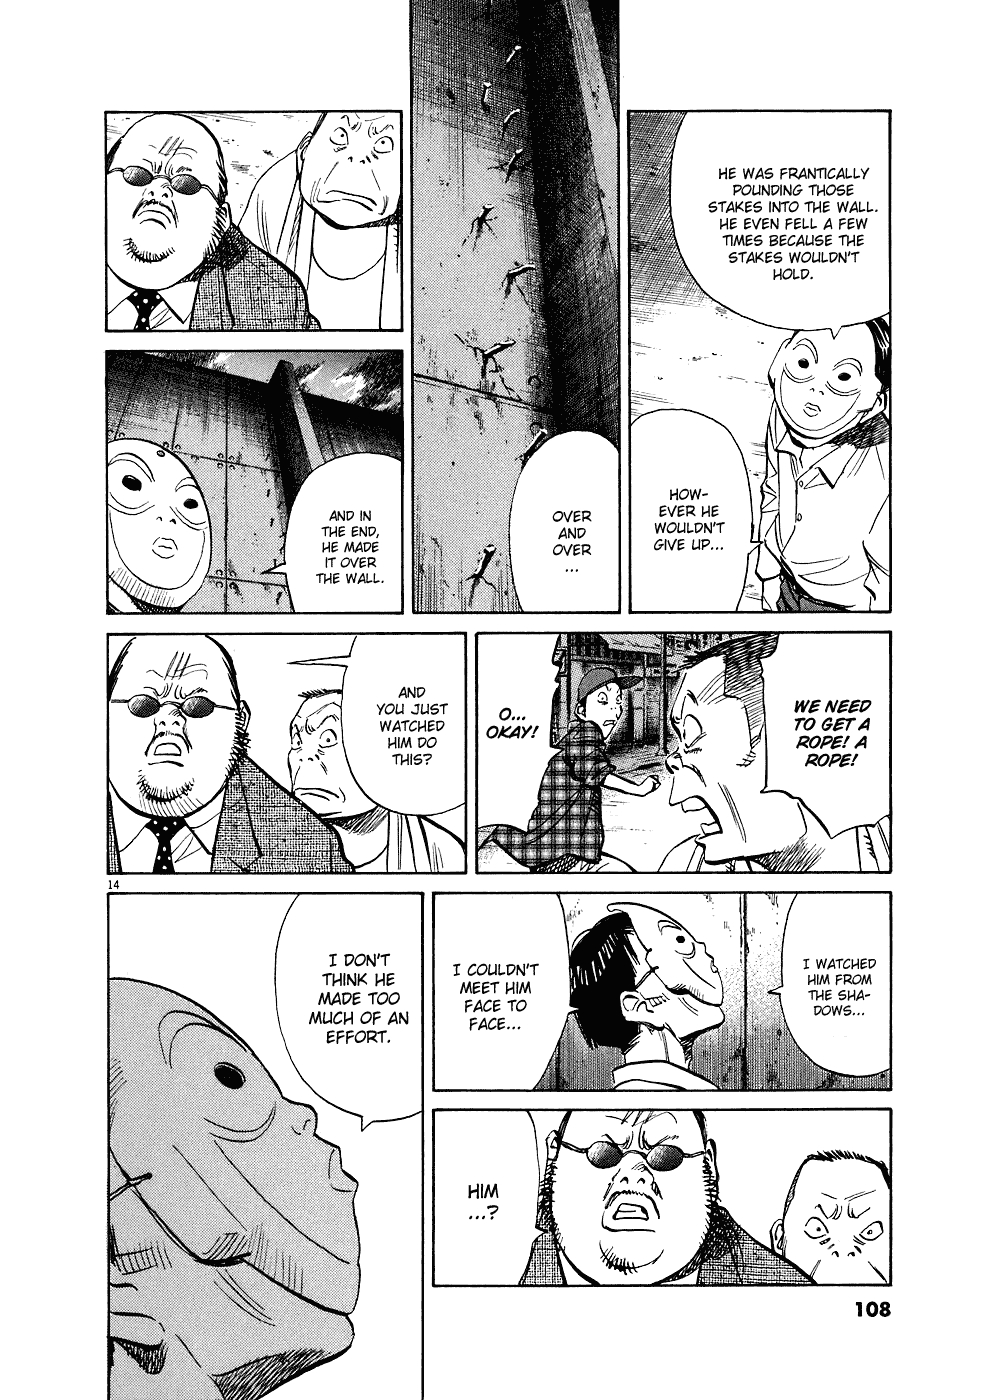 20th Century Boys Vol. 22 Ch. 242 The Masked King